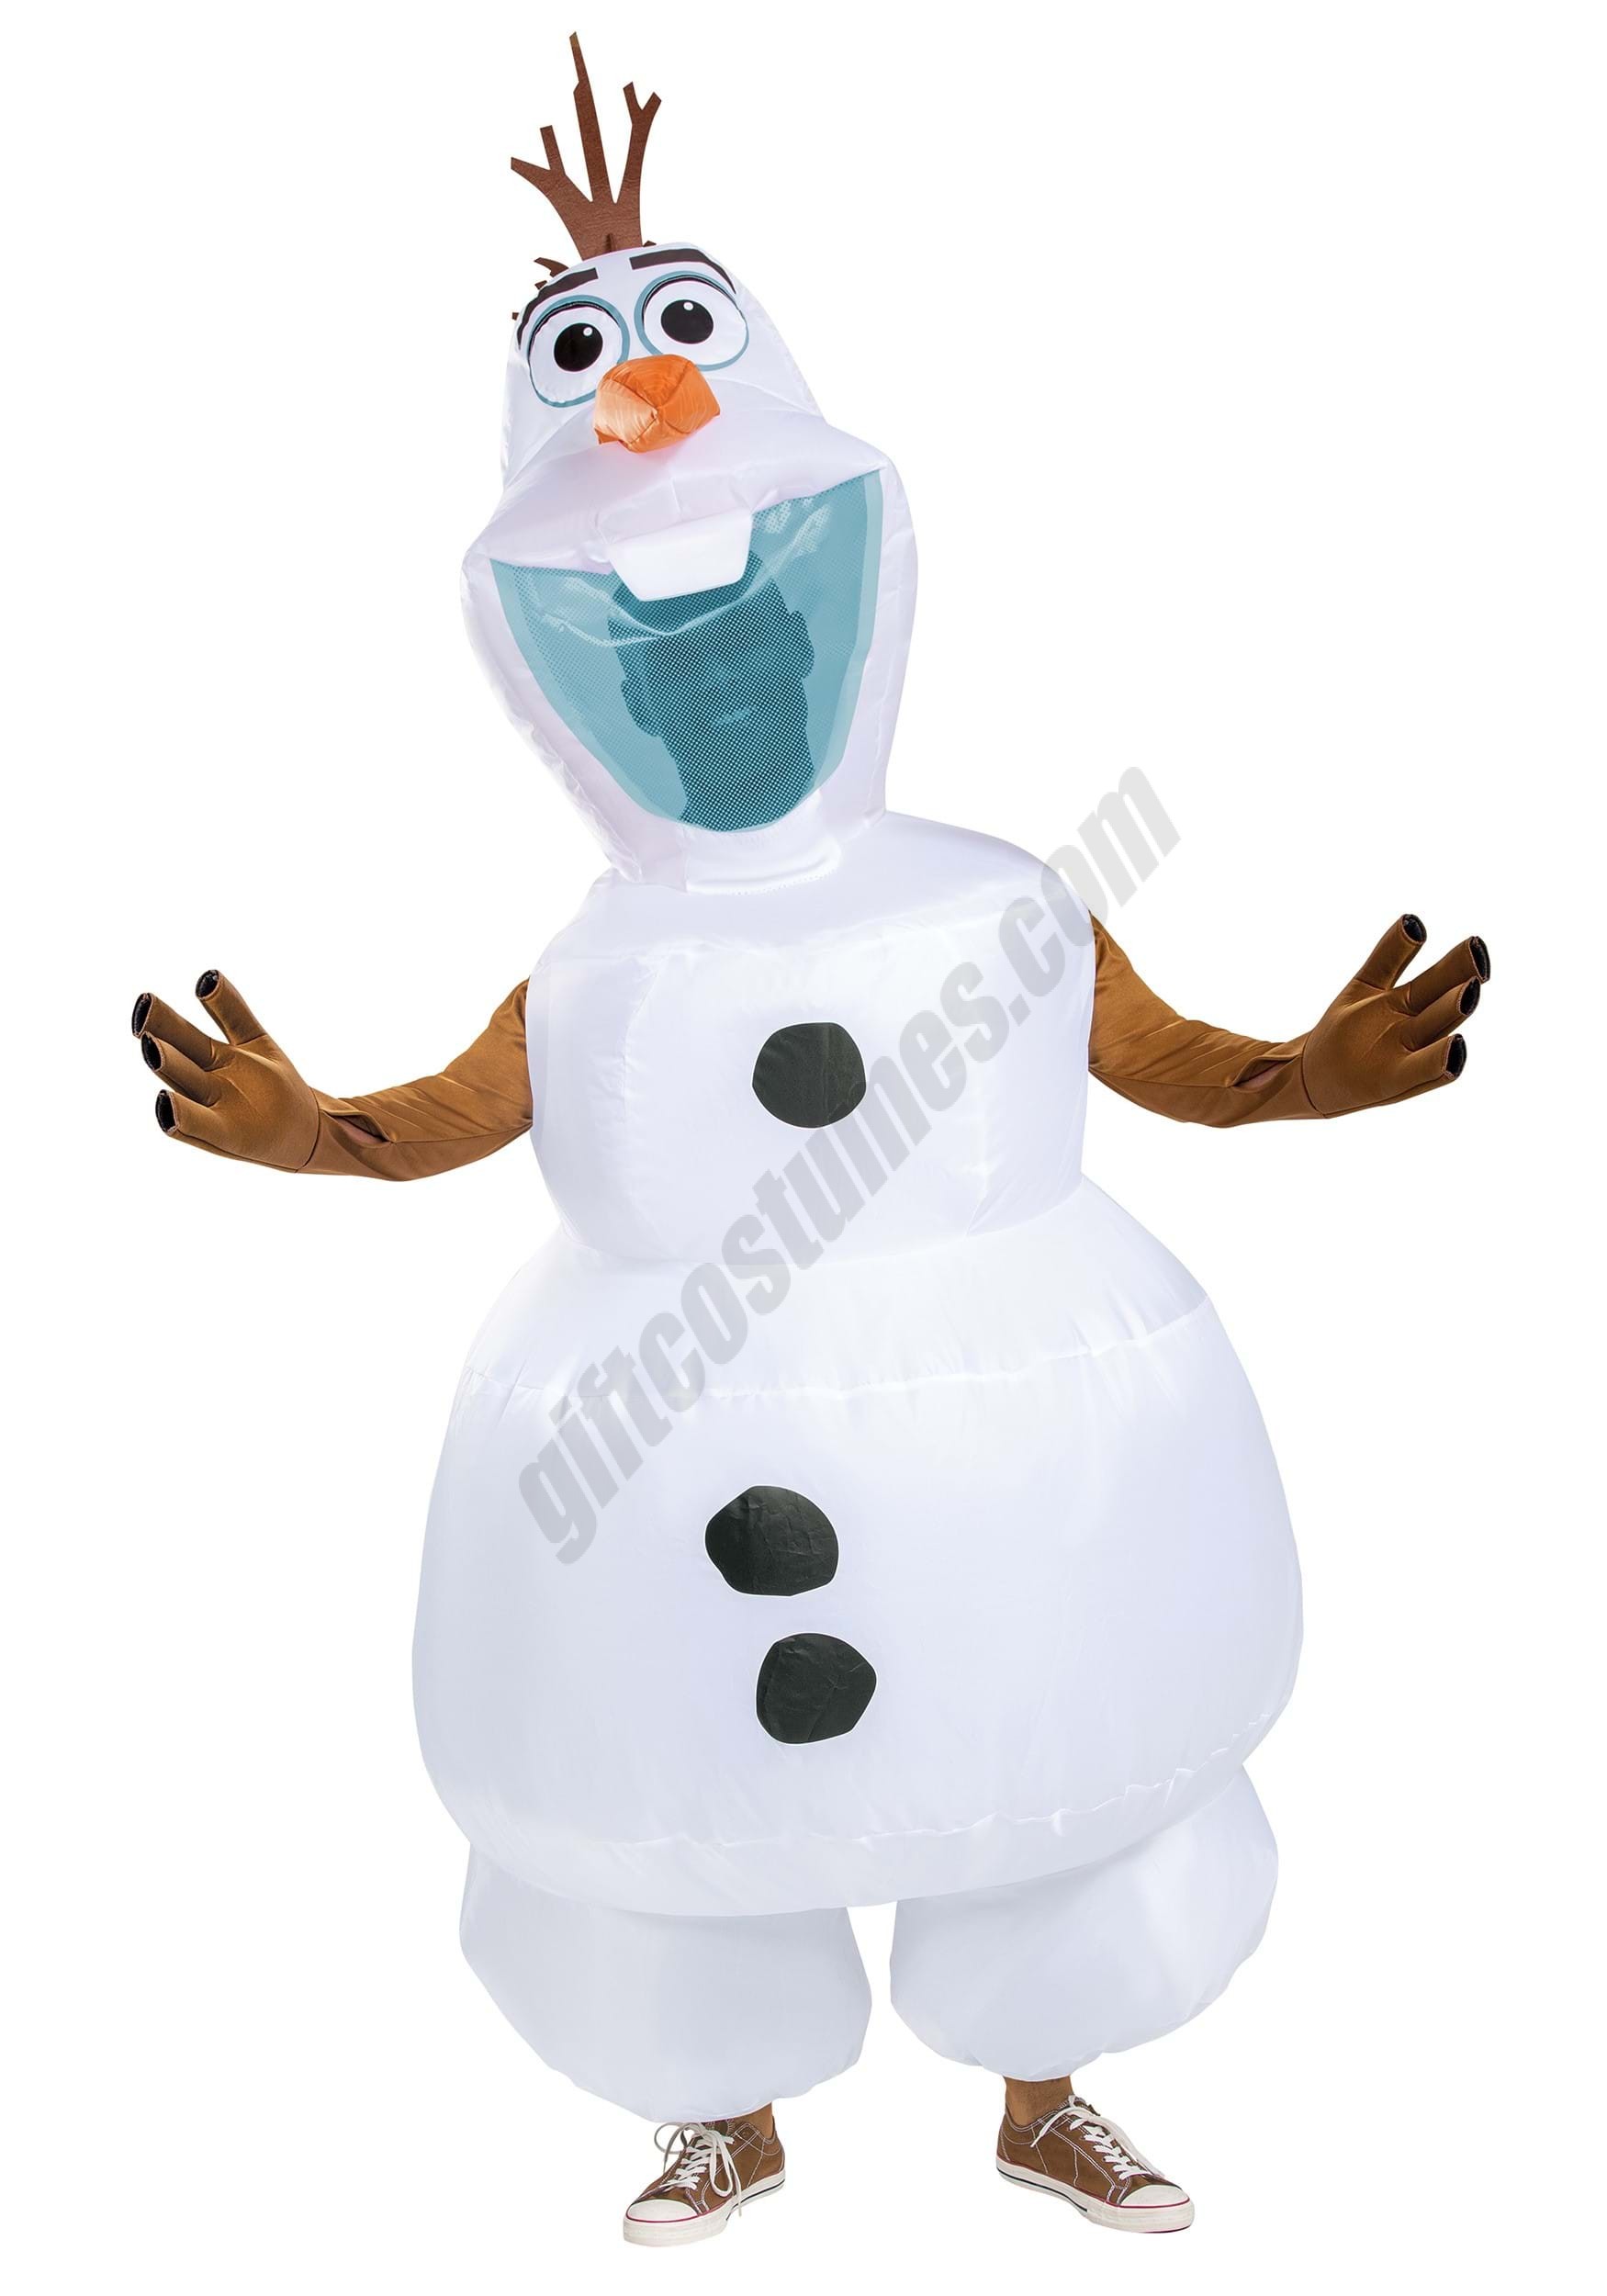 Frozen Adult Olaf Inflatable Costume Promotions - Frozen Adult Olaf Inflatable Costume Promotions